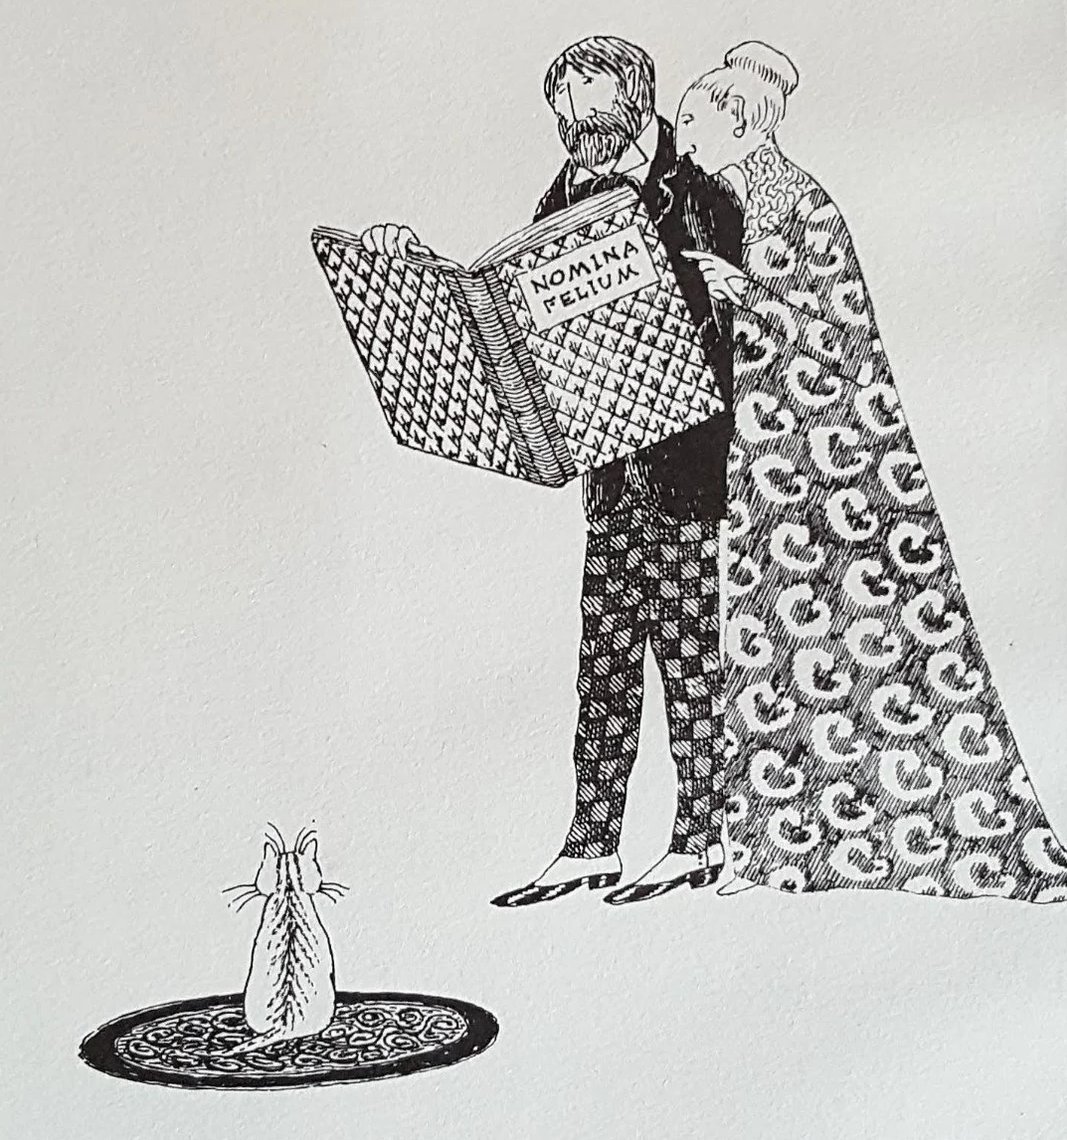 The Naming of Cats by T.S. Eliot 
illustration by Edward Gorey